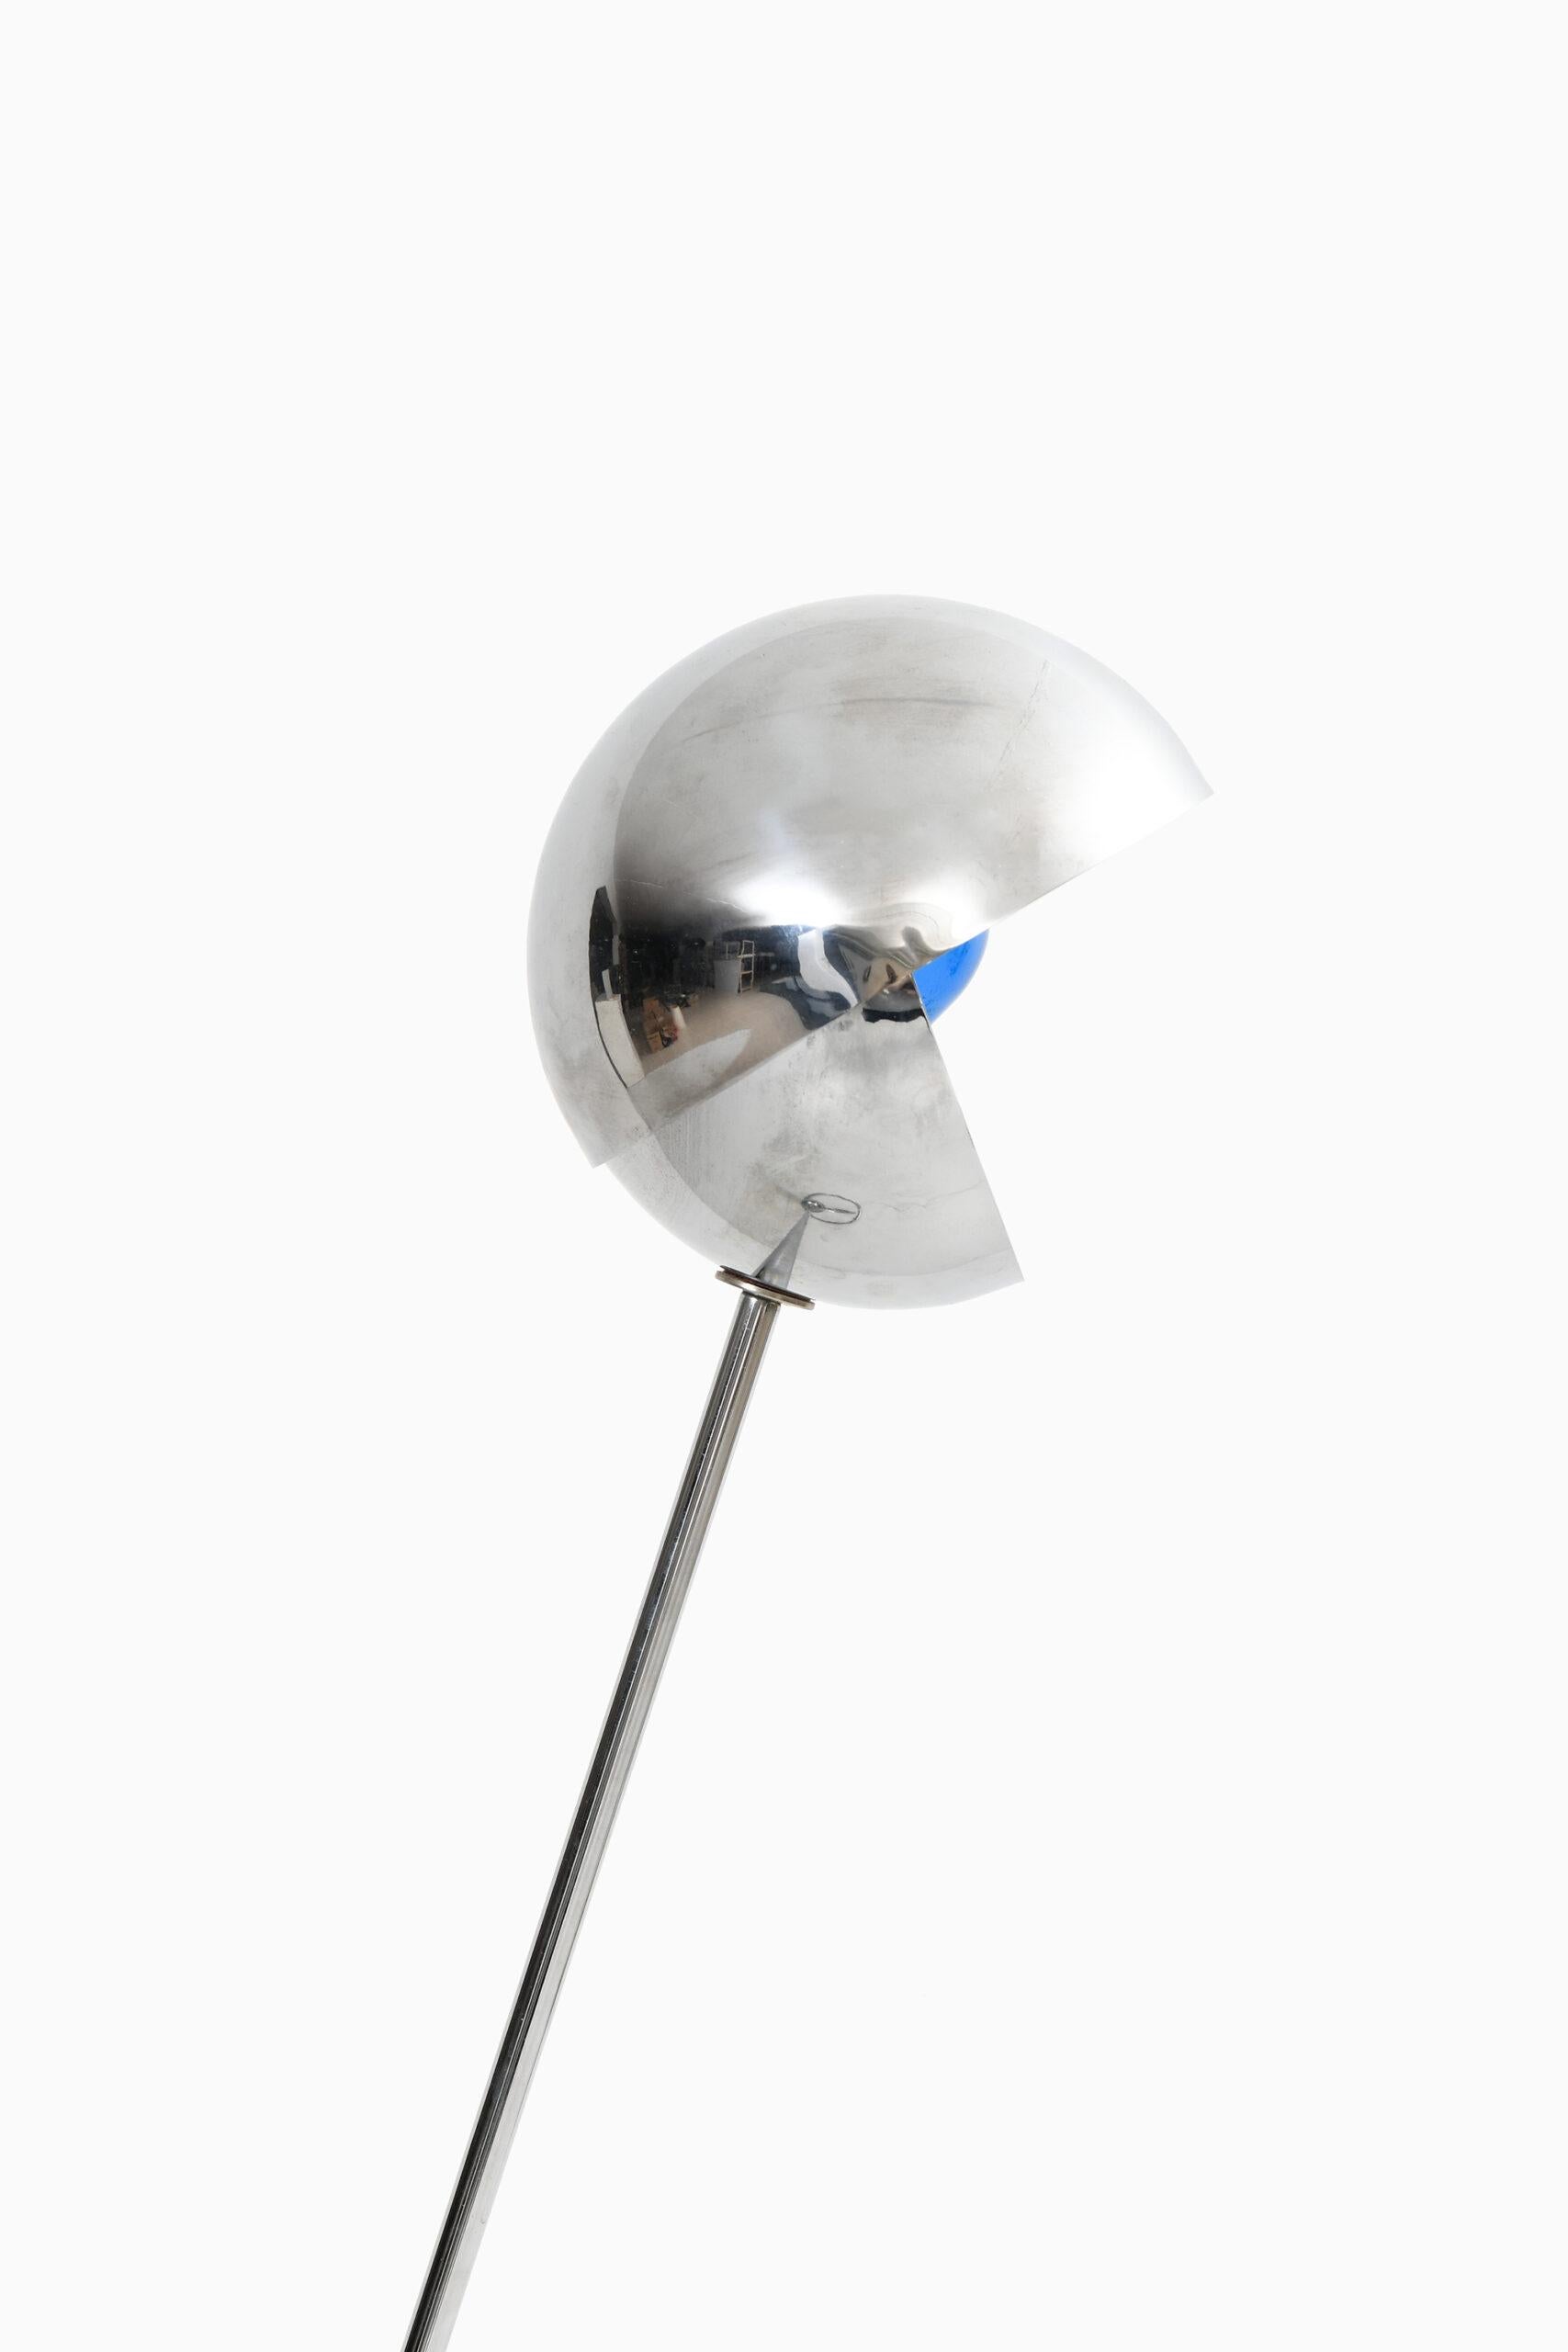 Mid-Century Modern Paolo Tilche Floor Lamp Model S3 Produced by Sirrah in Bologna, Italy For Sale